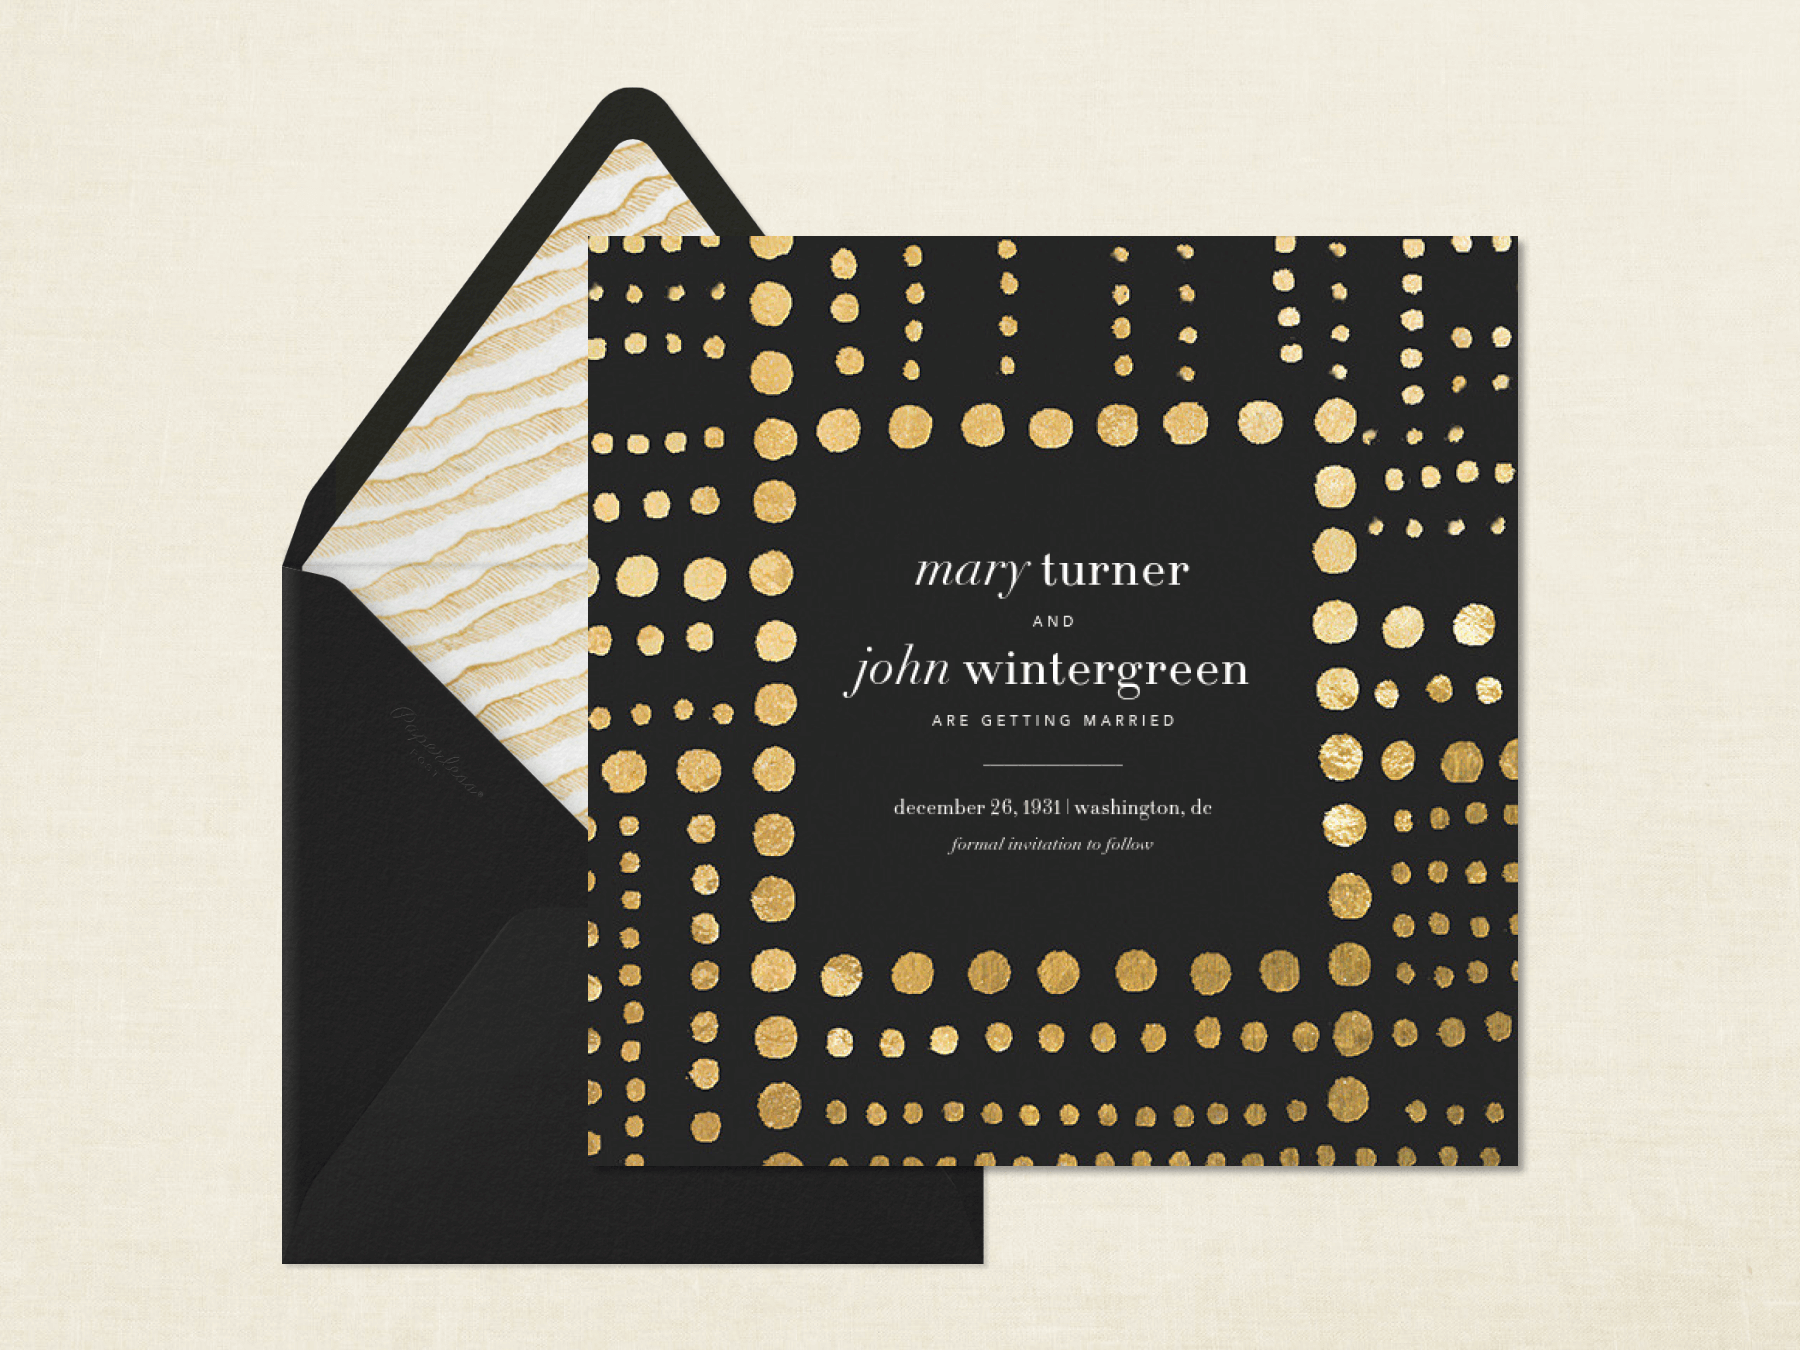 A black wedding invitation with painterly gold dots in various sizes forming a border beside a black envelope with gold zebra stripe liner on a neutral background.